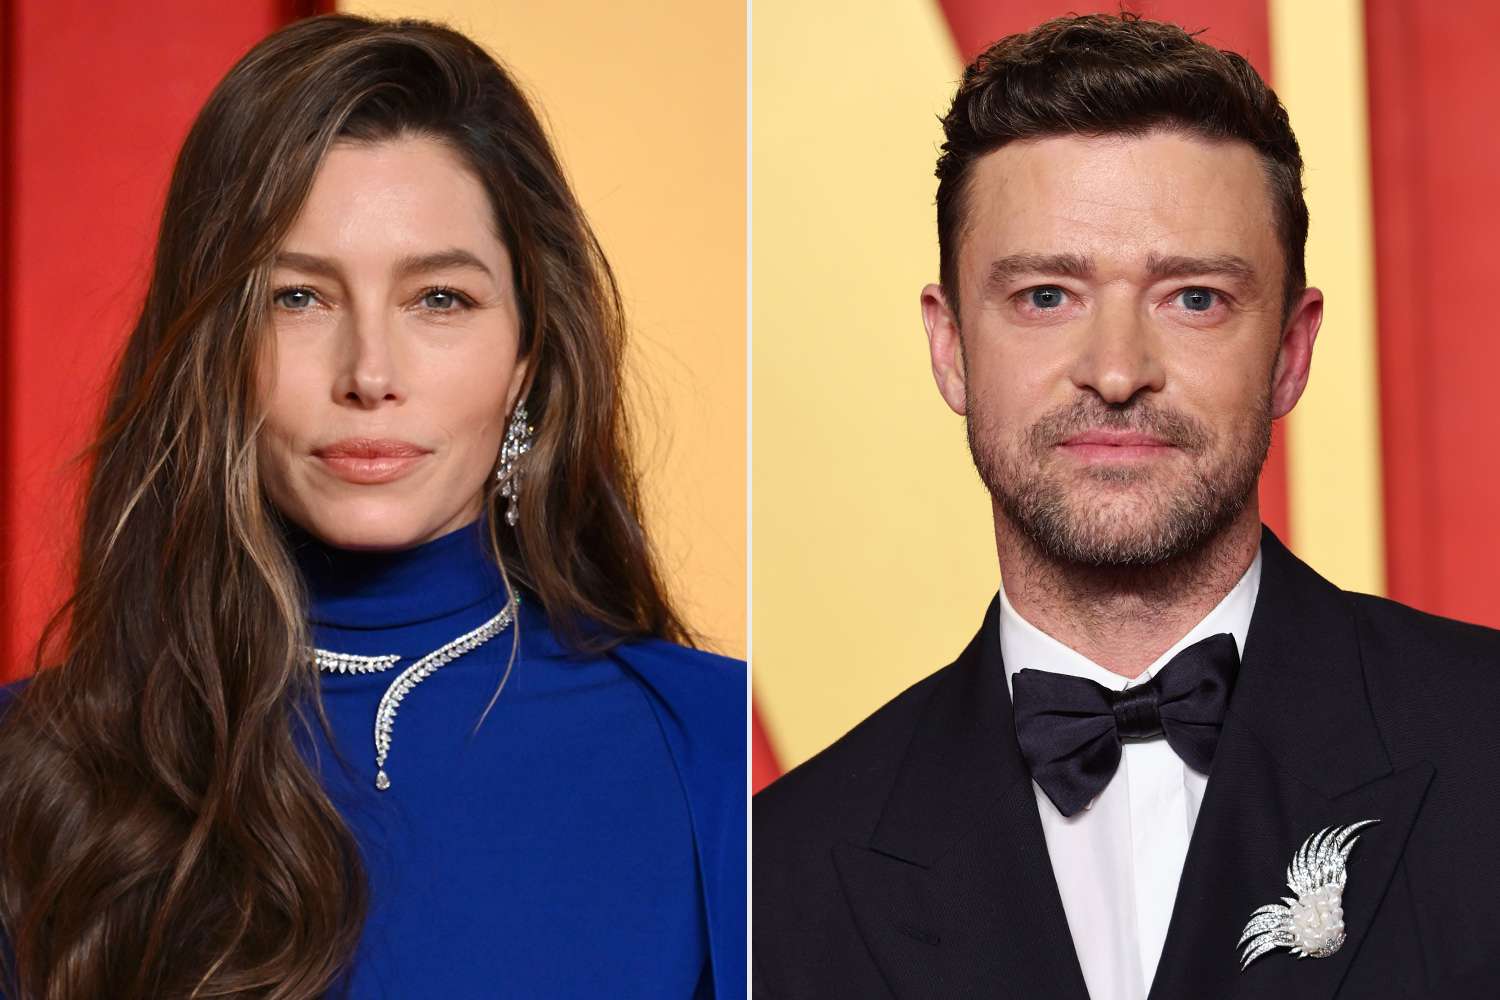 Jessica Biel Is 'Not Happy' About Justin Timberlake's Arrest But 'Will Always Be by His Side': Source